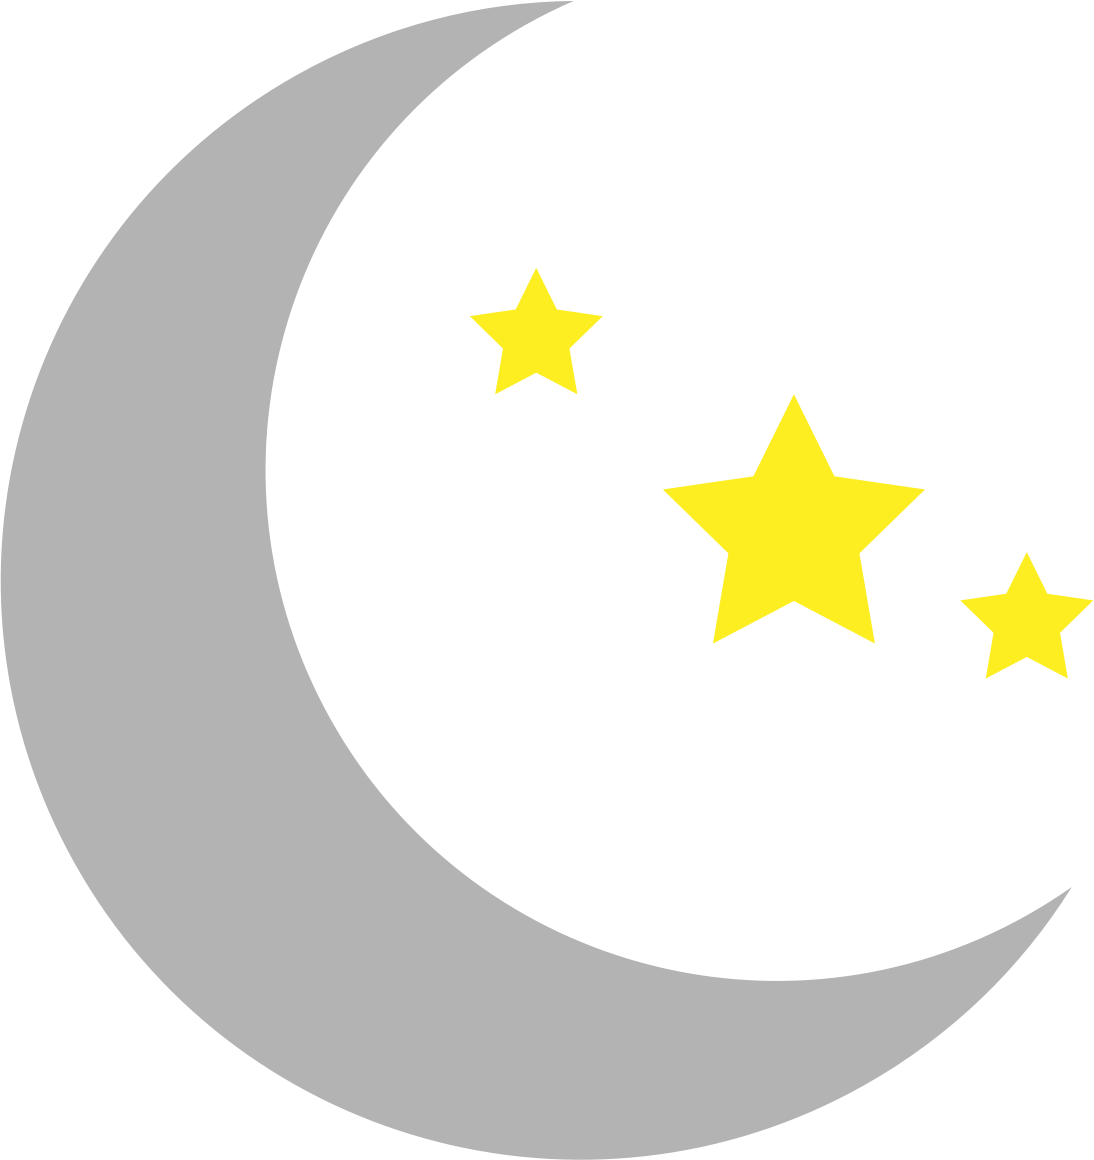 Stars and moon cliparts the